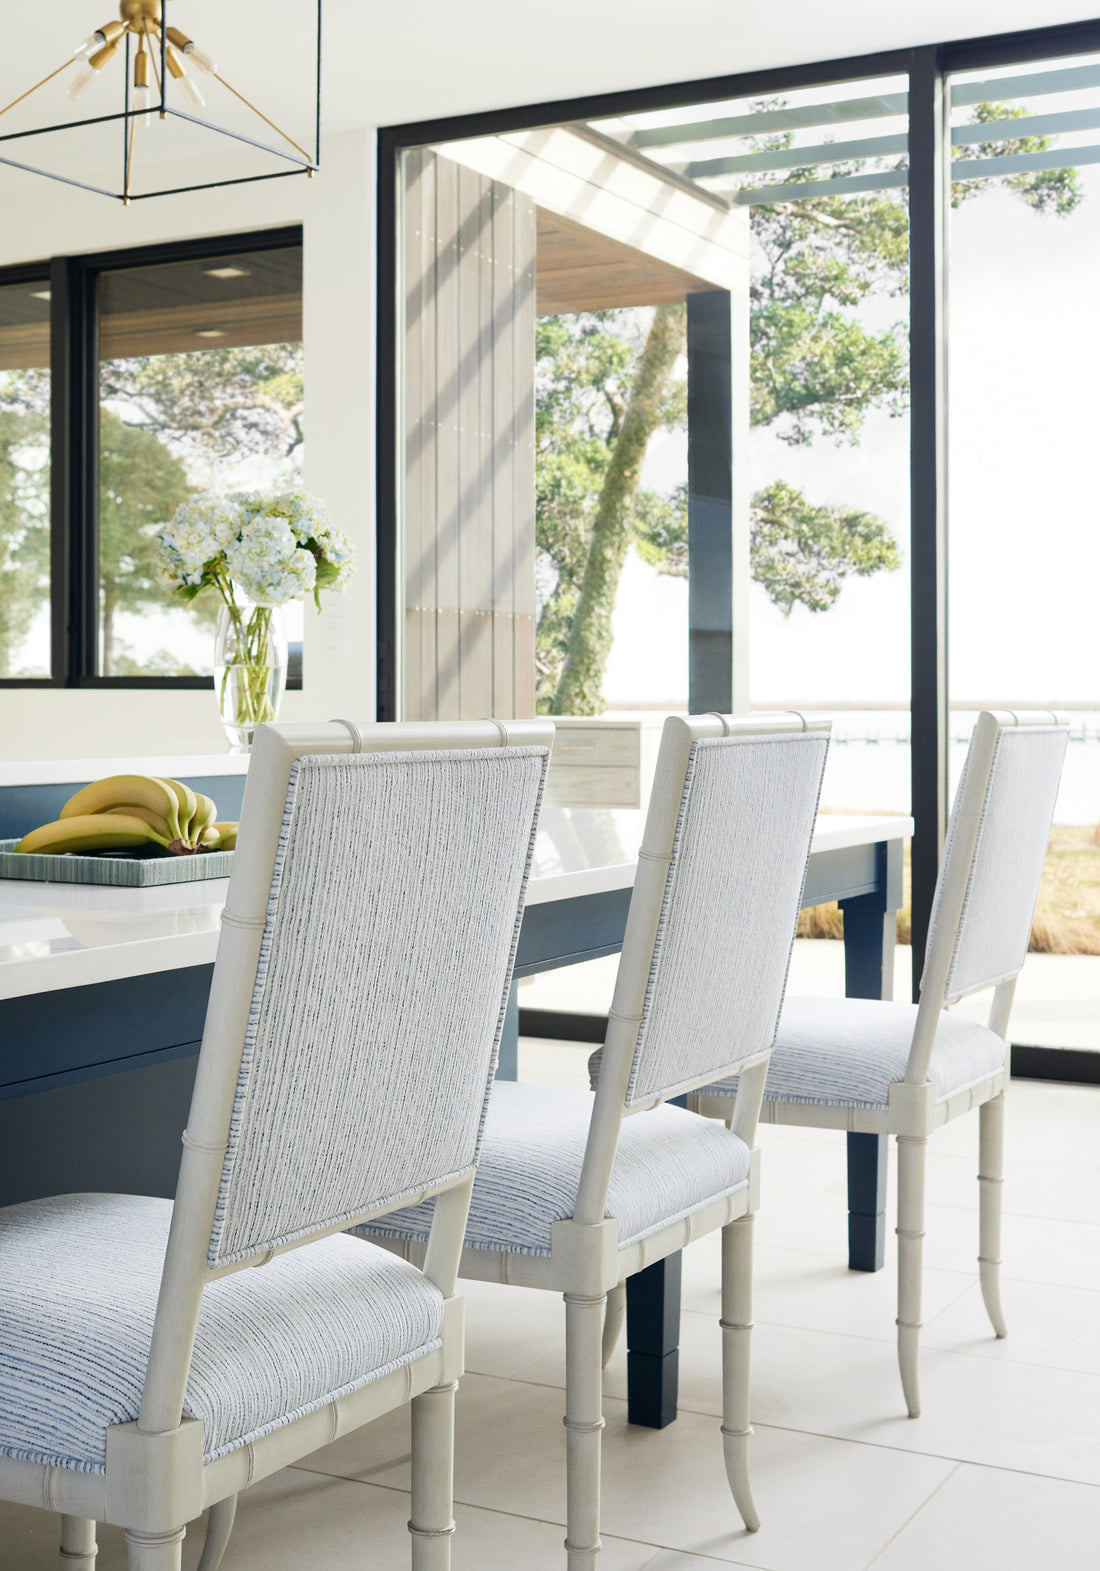 Dining chairs featuring Zia Stripe fabric in sky color - pattern number W8806 - by Thibaut in the Haven collection